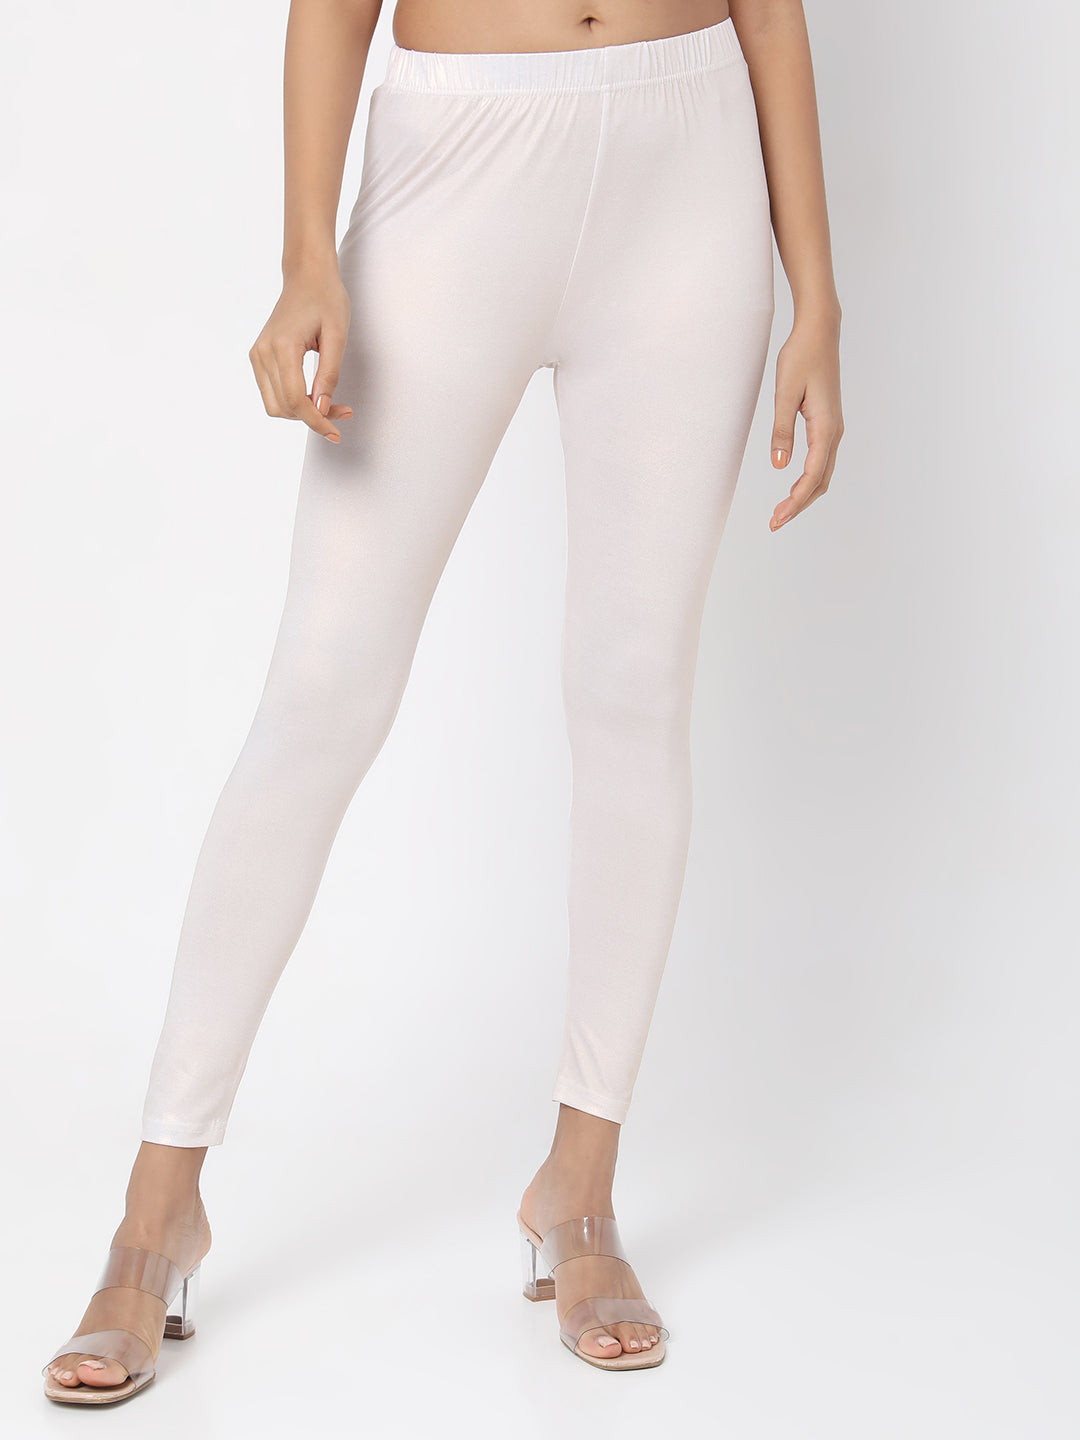 Women's White Polyester Spandex Solid Leggings - Ethnicity India